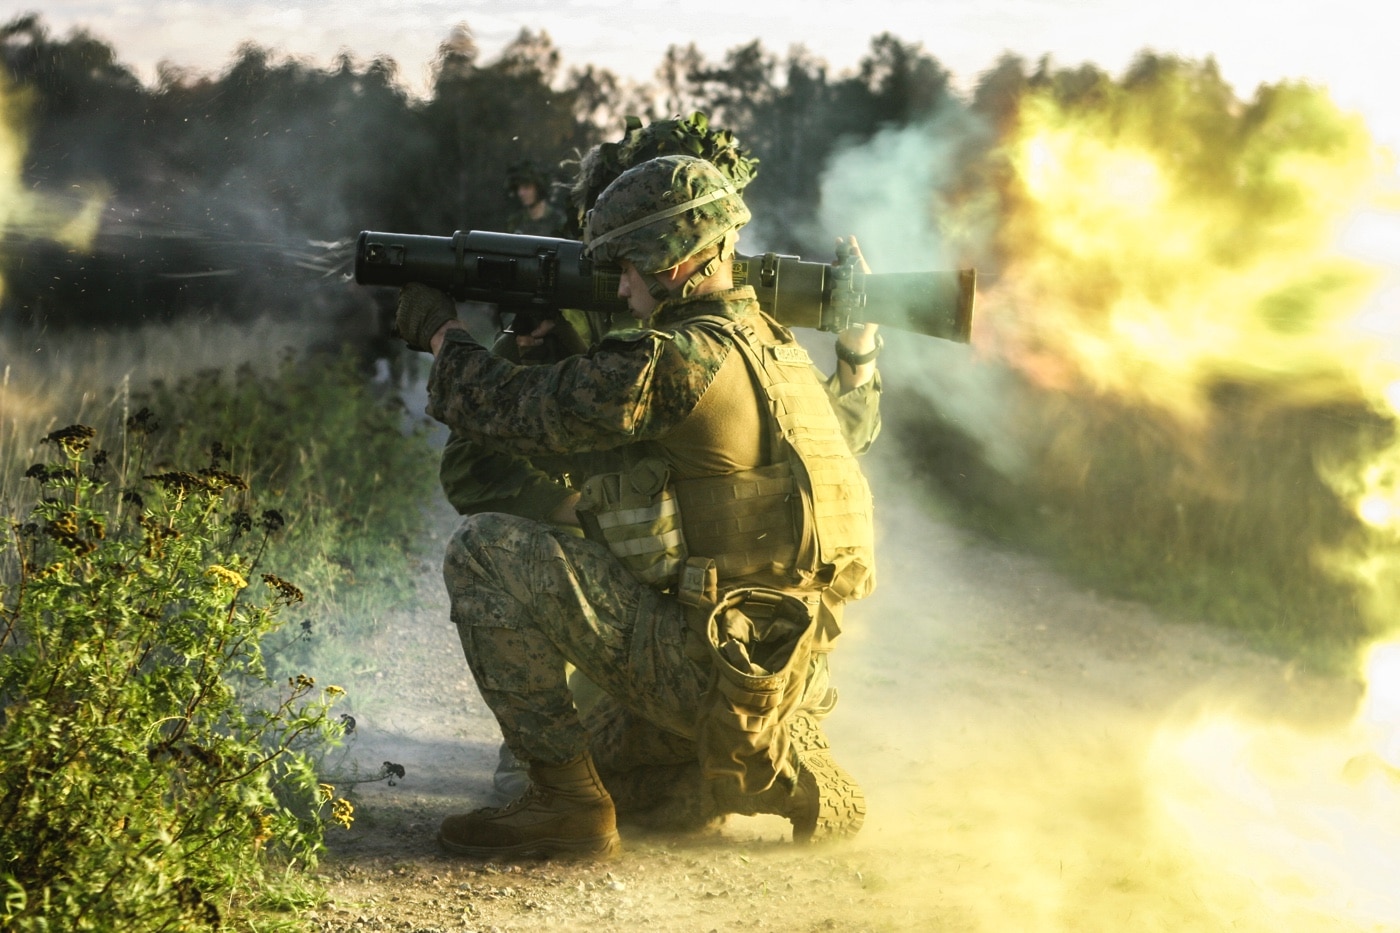 In this photo, we see a U.S. Marine training in Anti-tank warfare. At no point in the past has an infantryman been more able to disable a tank in armoured warfare. Recoilless rifles and anti-tank rockets and missiles are deadly on the modern battlefield. In this history of armed conflict, the move and countermove of technology is a constant back and forth. Often the outcome of a war can be determined by the manufacturing base more than the maneuvering. Military equipment in military service, such as armored fighting vehicles, show off the science and technology of each country.